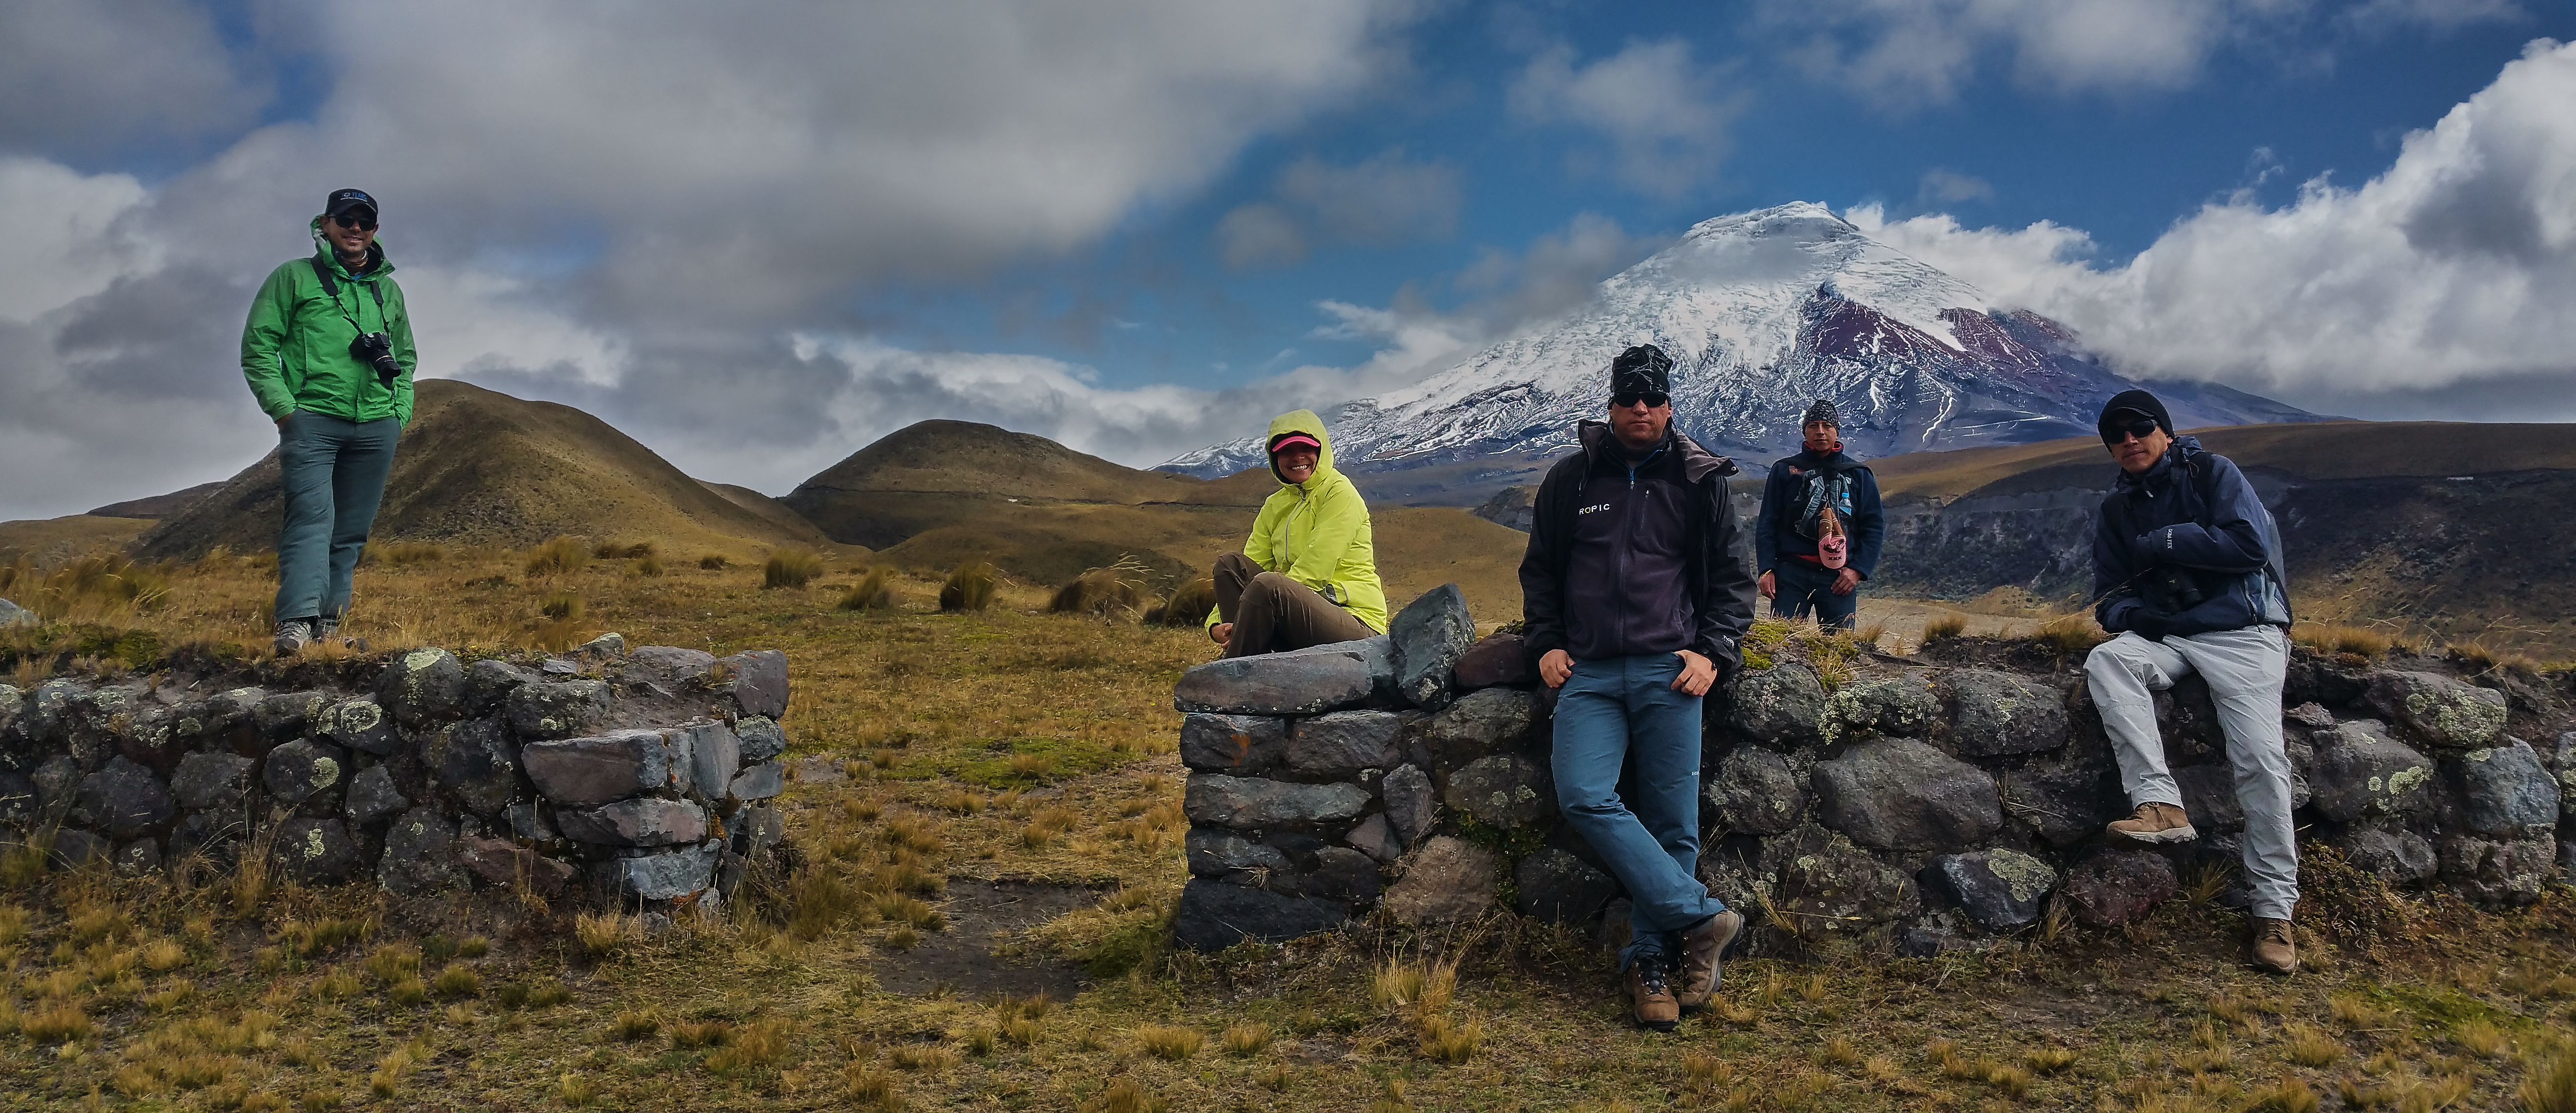 Cotopaxi hiking group